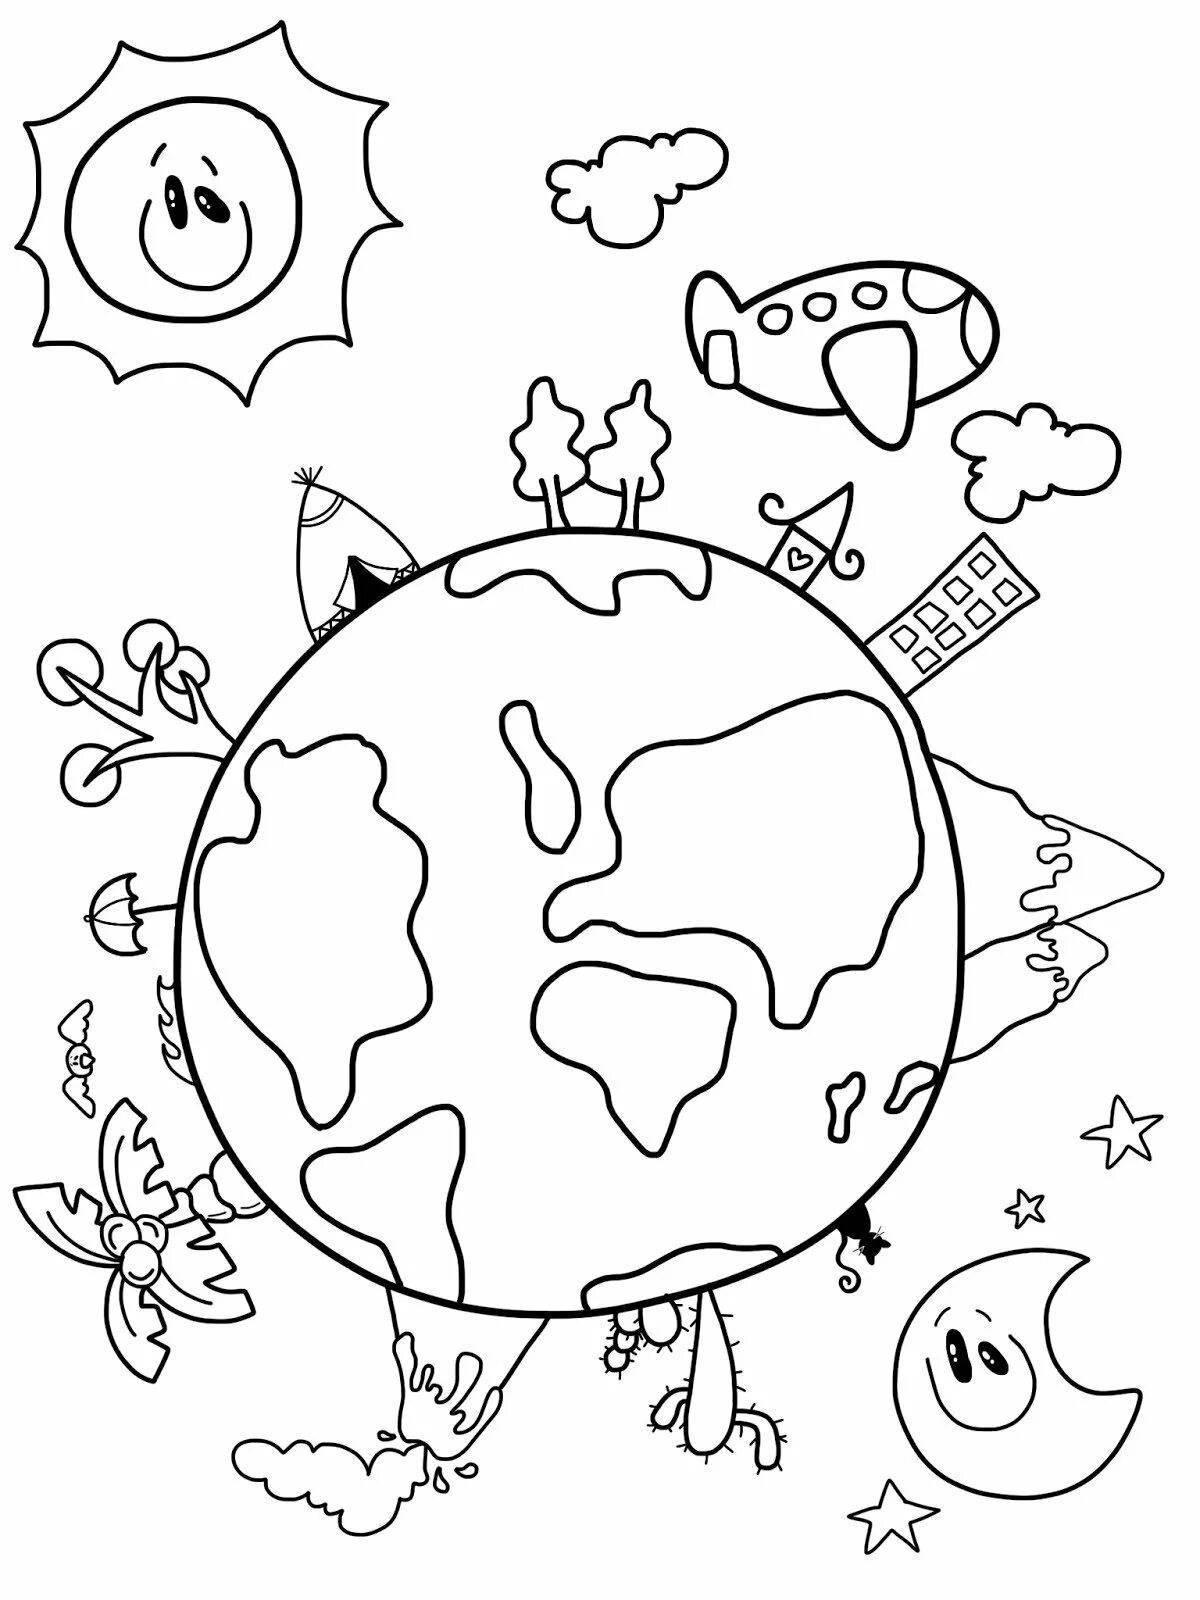 Dazzling i paint the world coloring page